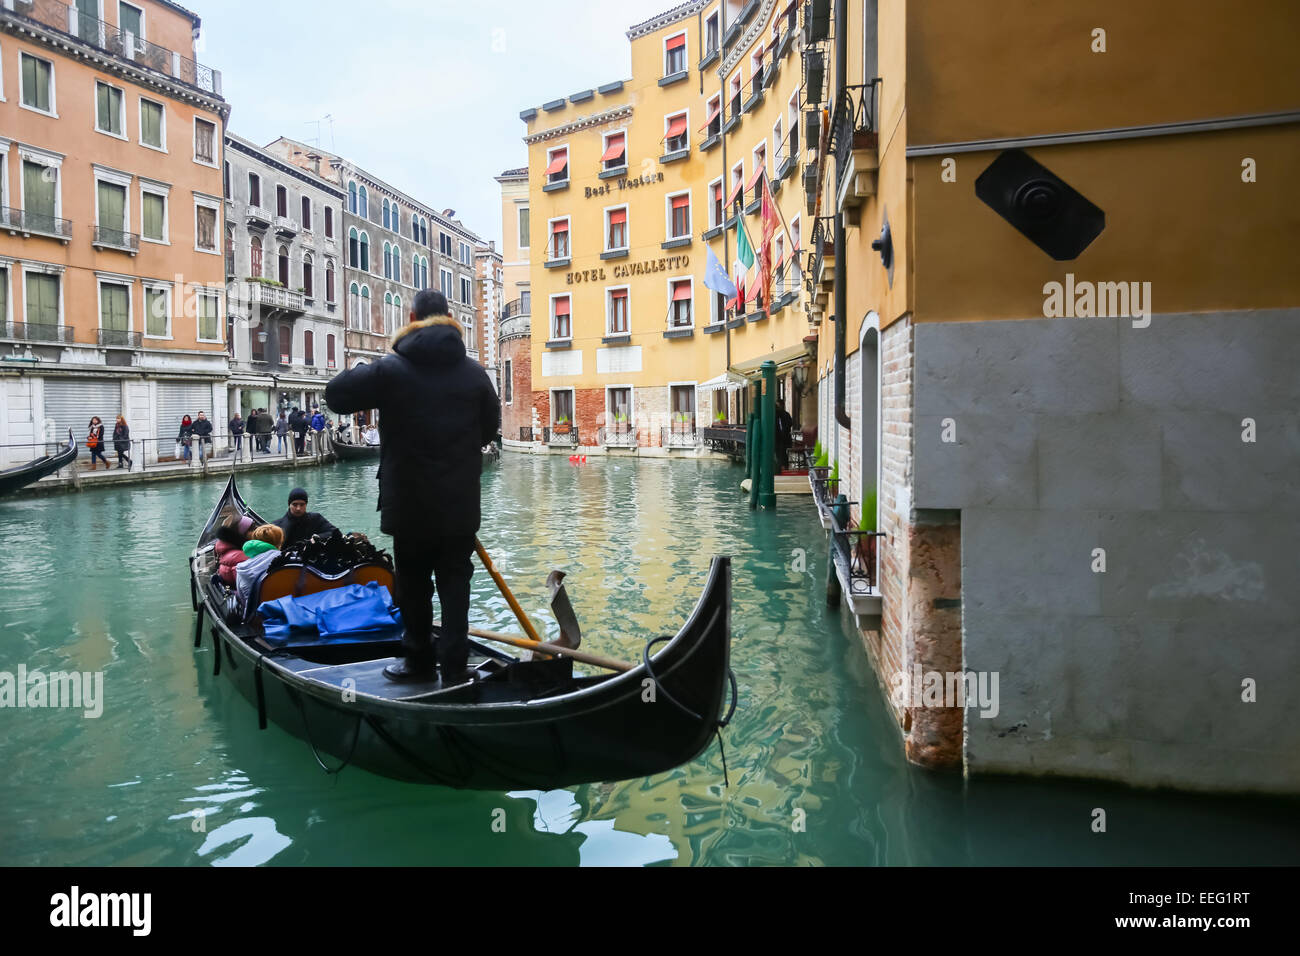 Tourists sailing in a gondola through a water canal next to Hotel Cavalletto in Venice, Italy. Stock Photo